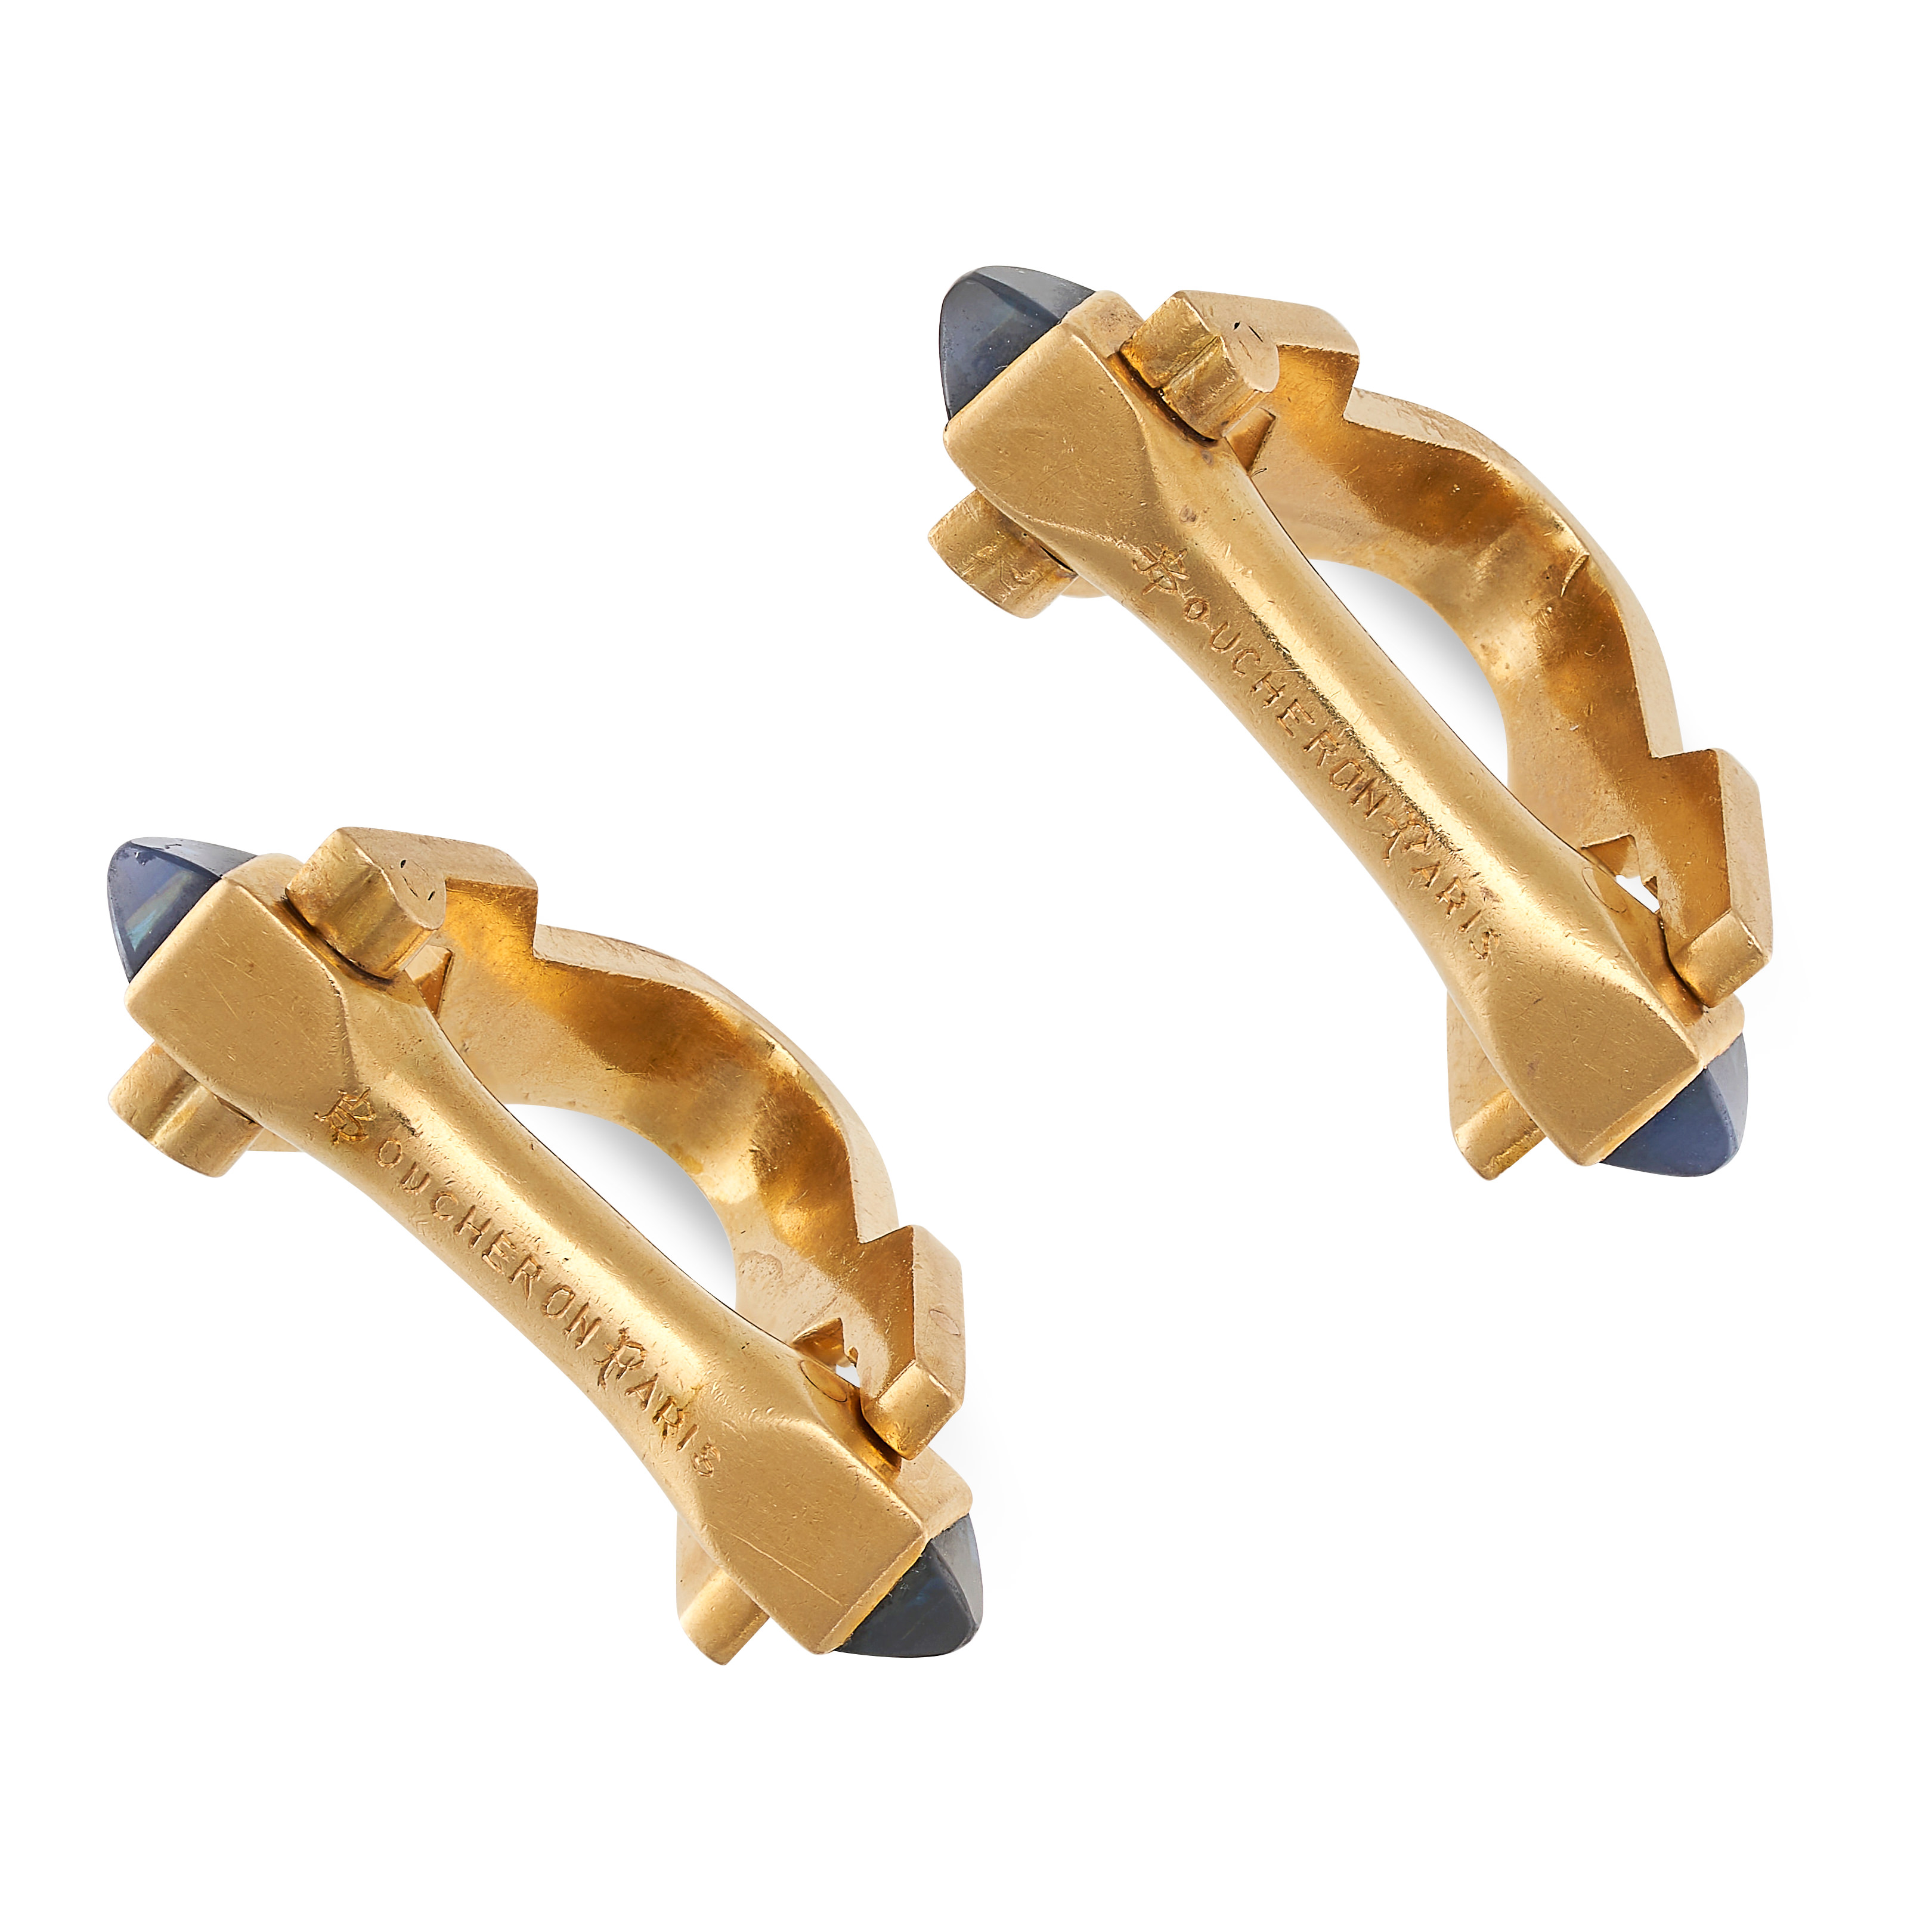 BOUCHERON, A PAIR OF VINTAGE SAPPHIRE STIRRUP CUFFLINKS in 18ct yellow gold, each formed of two - Image 2 of 2